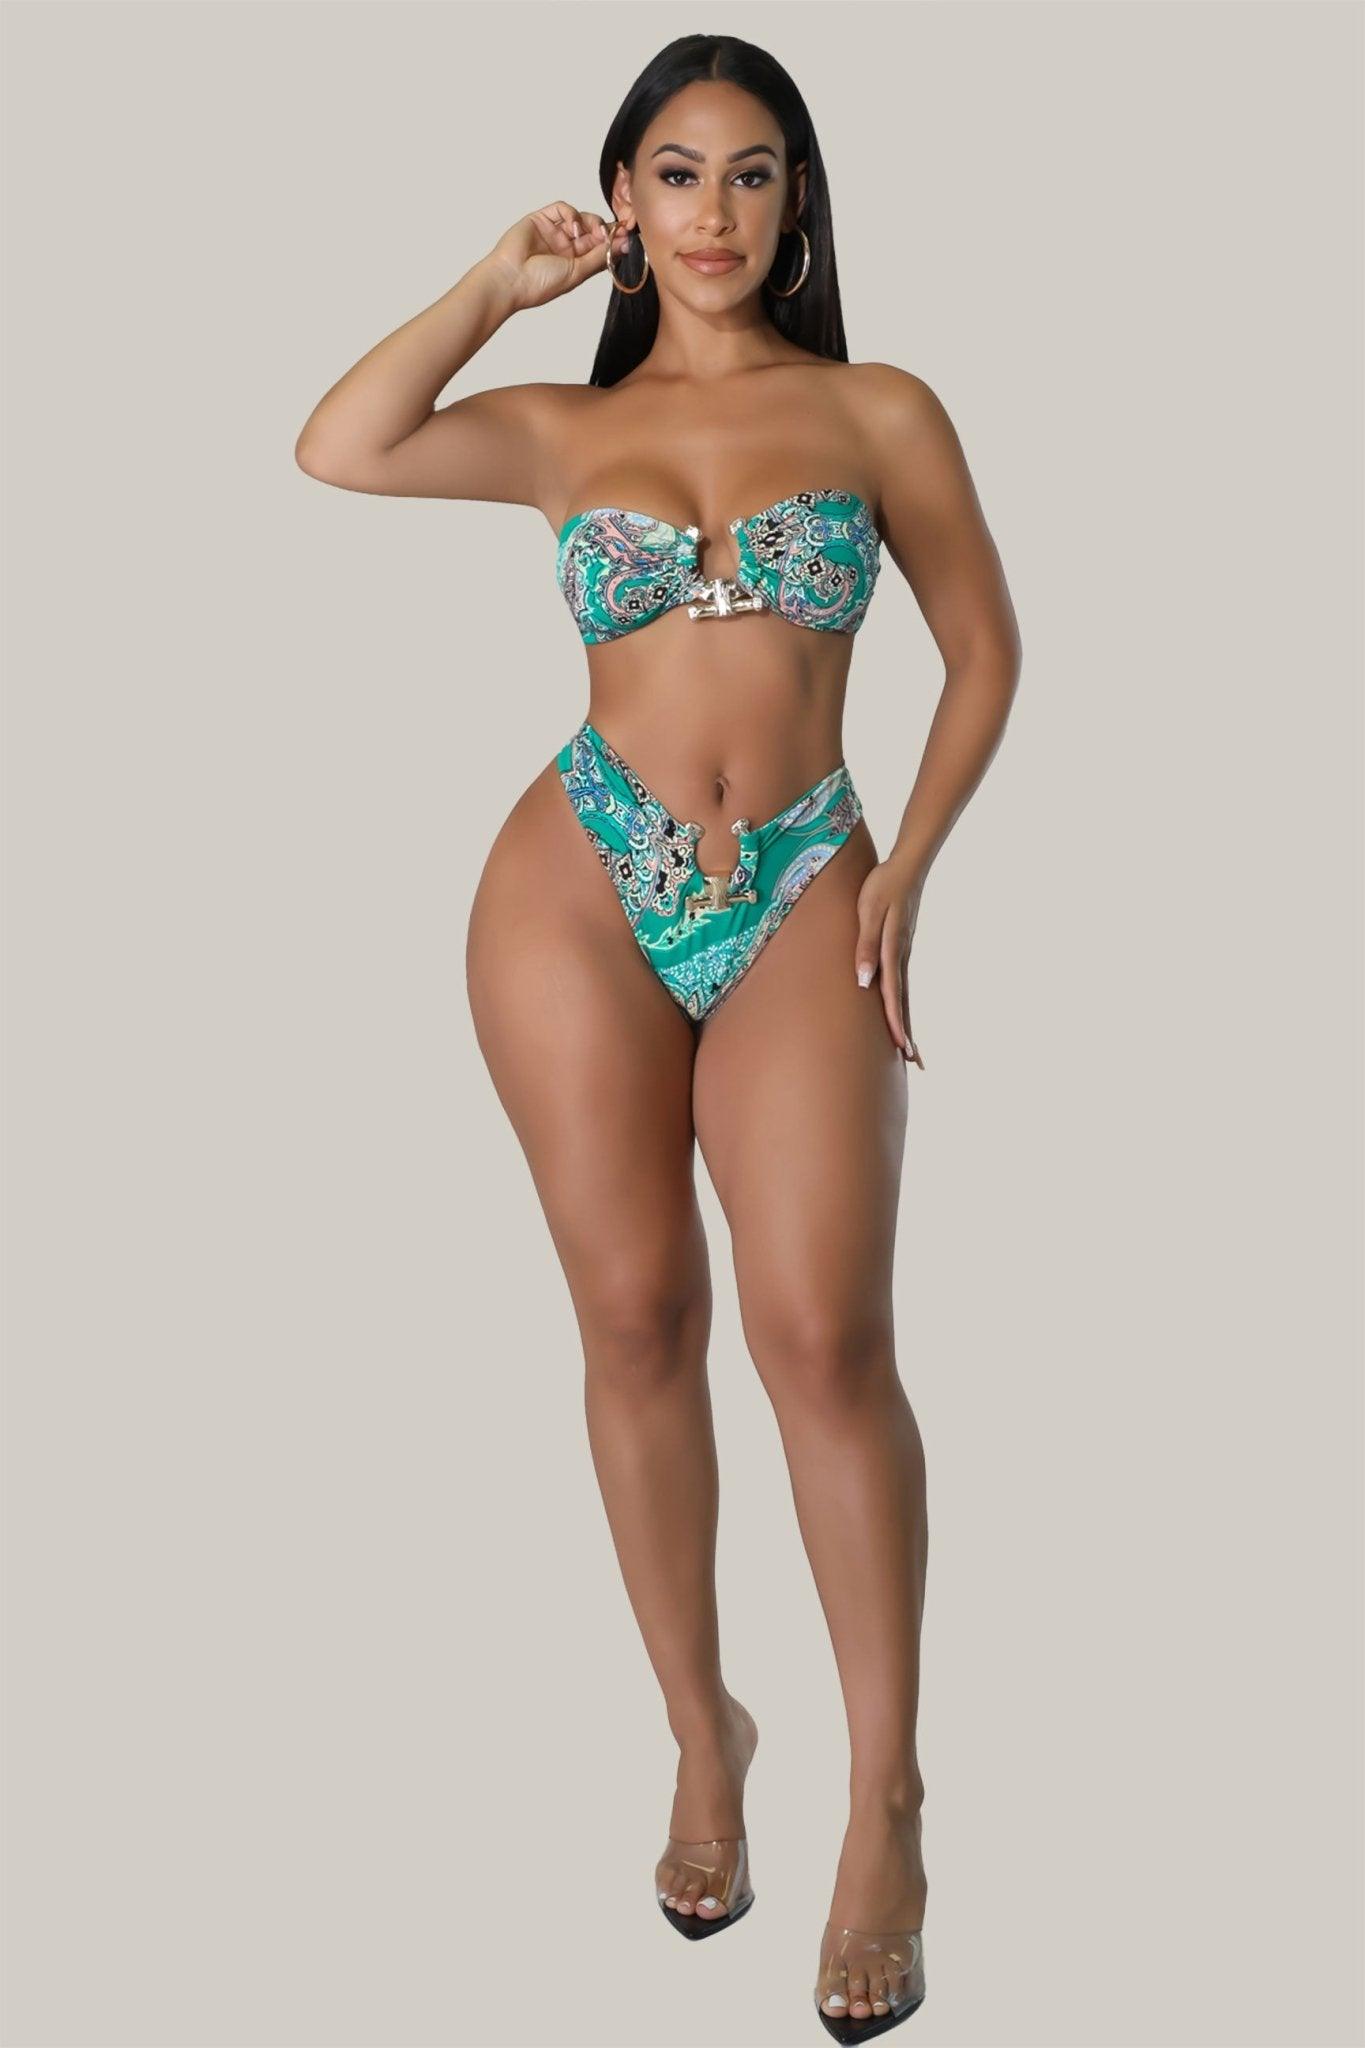 Babe on Fire Swimsuit - MY SEXY STYLES